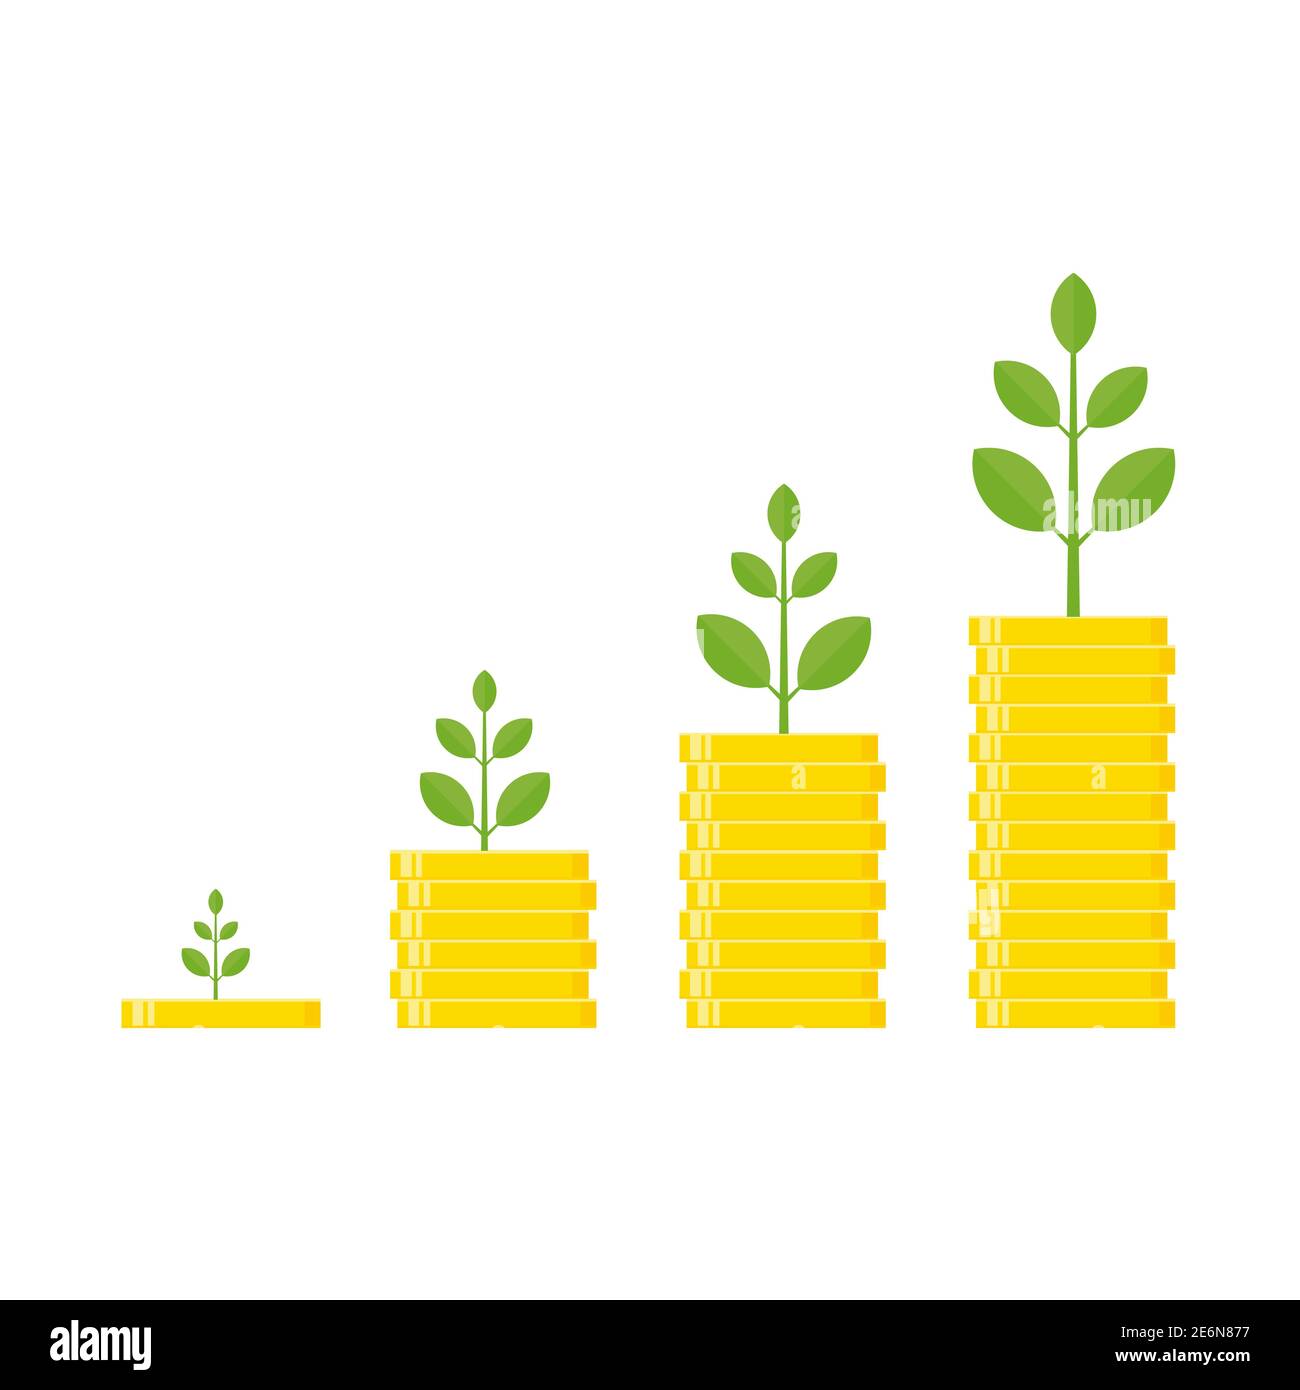 Growth money tree icon. Wealthy business concept. Vector investment illustration isolated on white Stock Vector